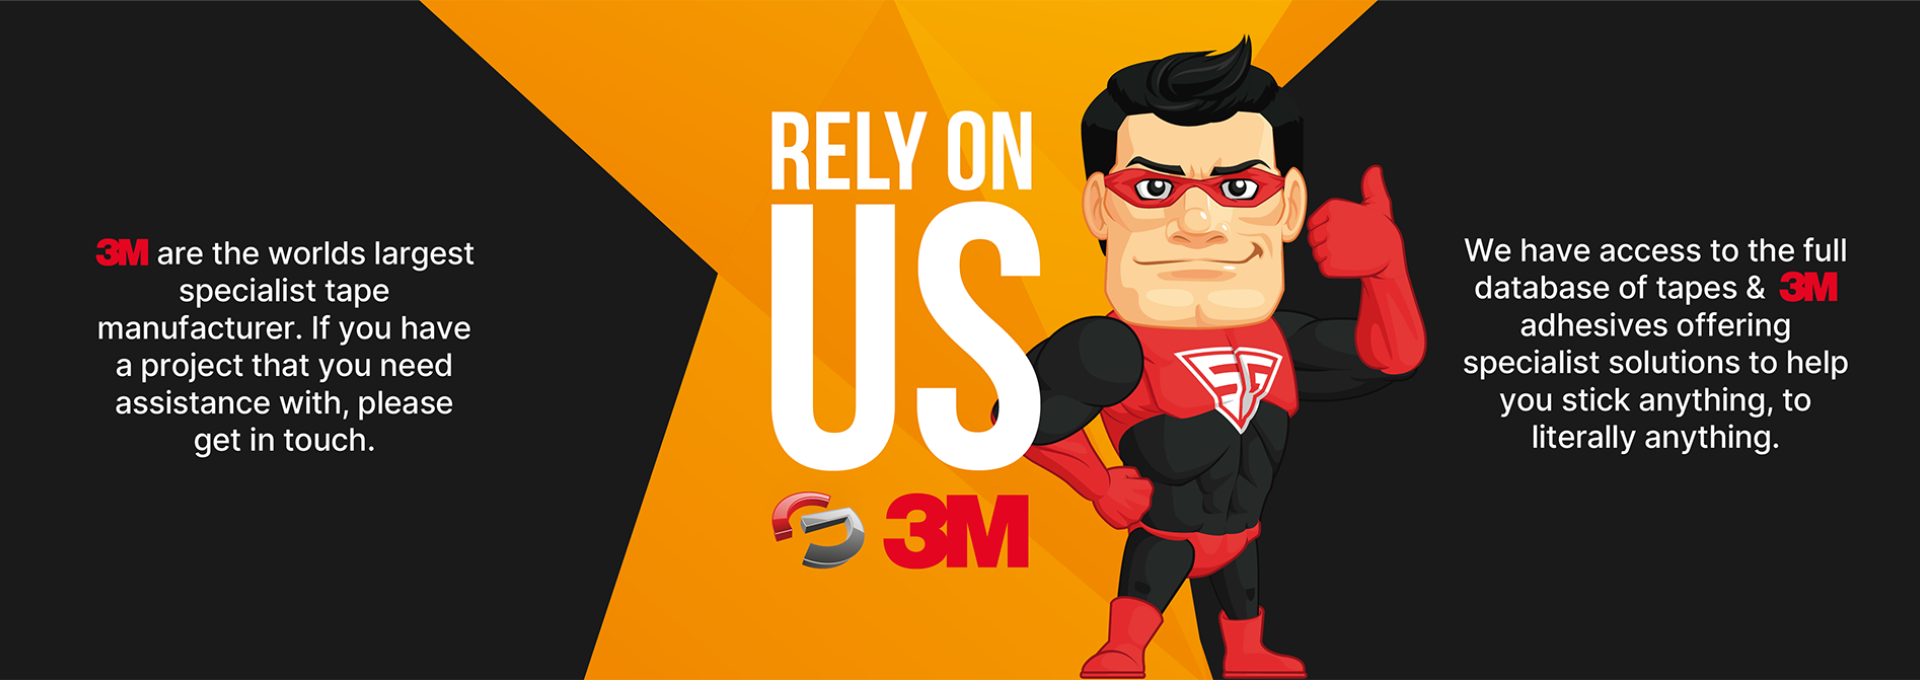 3m Rely on us